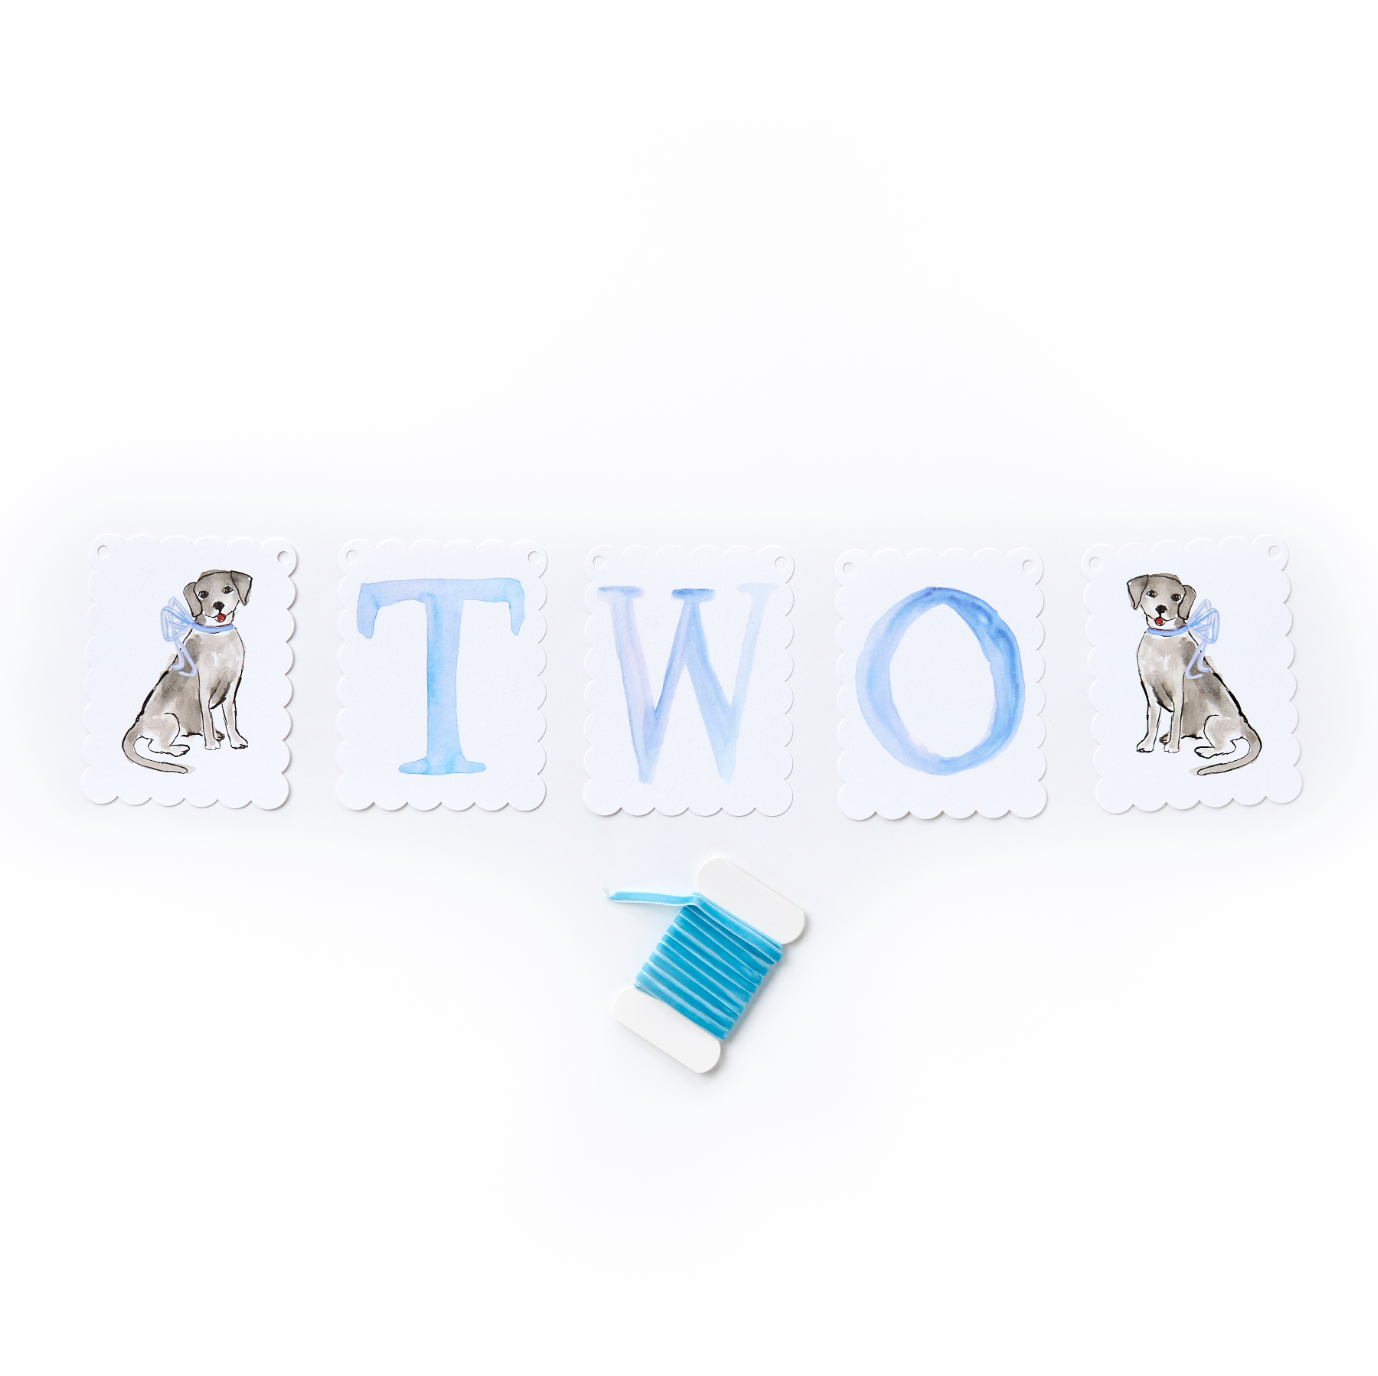 "Two" Highchair Banner